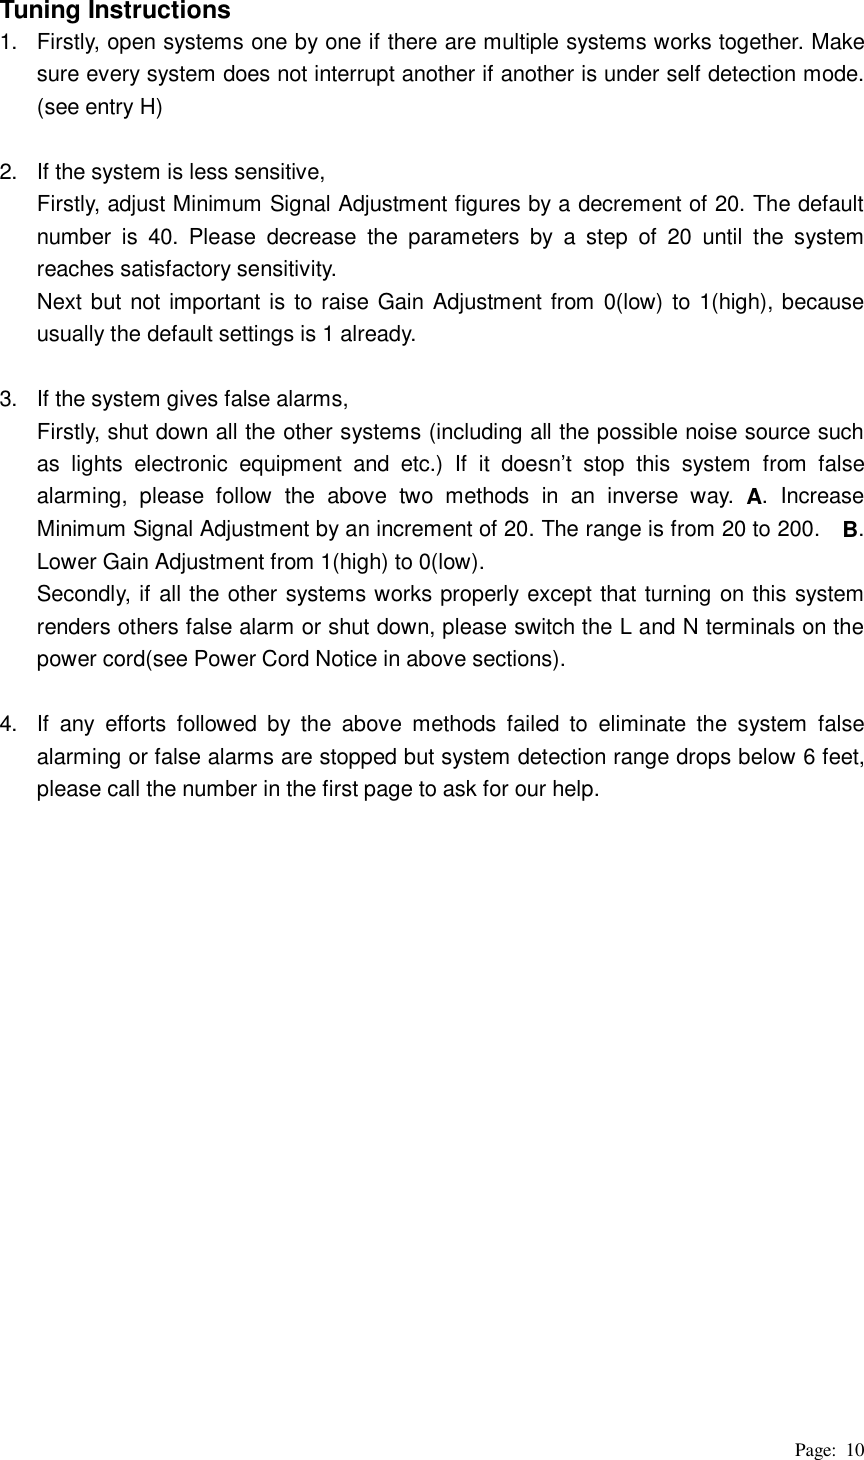 Page: 10 Tuning Instructions 1.  Firstly, open systems one by one if there are multiple systems works together. Make sure every system does not interrupt another if another is under self detection mode. (see entry H)  2.  If the system is less sensitive,   Firstly, adjust Minimum Signal Adjustment figures by a decrement of 20. The default number is 40. Please decrease the parameters by a step of 20 until the system reaches satisfactory sensitivity.   Next but not important is to raise Gain Adjustment from 0(low) to 1(high), because usually the default settings is 1 already.  3.  If the system gives false alarms, Firstly, shut down all the other systems (including all the possible noise source such as lights electronic equipment and etc.) If it doesn’t stop this system from false alarming, please follow the above two methods in an inverse way. A. Increase Minimum Signal Adjustment by an increment of 20. The range is from 20 to 200.    B. Lower Gain Adjustment from 1(high) to 0(low).   Secondly, if all the other systems works properly except that turning on this system renders others false alarm or shut down, please switch the L and N terminals on the power cord(see Power Cord Notice in above sections).  4.  If any efforts followed by the above methods failed to eliminate the system false alarming or false alarms are stopped but system detection range drops below 6 feet, please call the number in the first page to ask for our help.                   